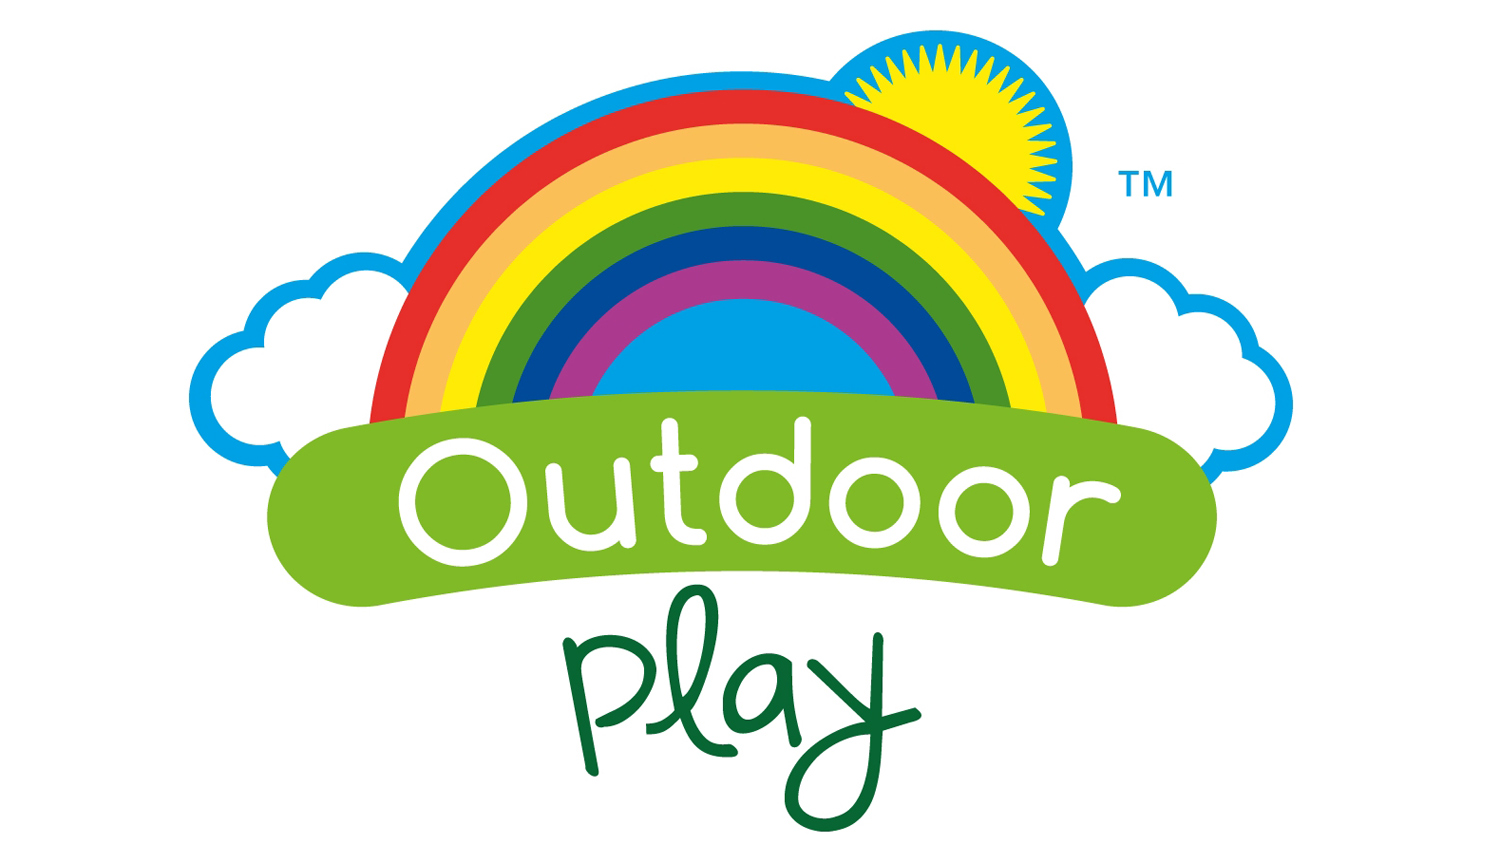 outdoor play clipart - photo #11